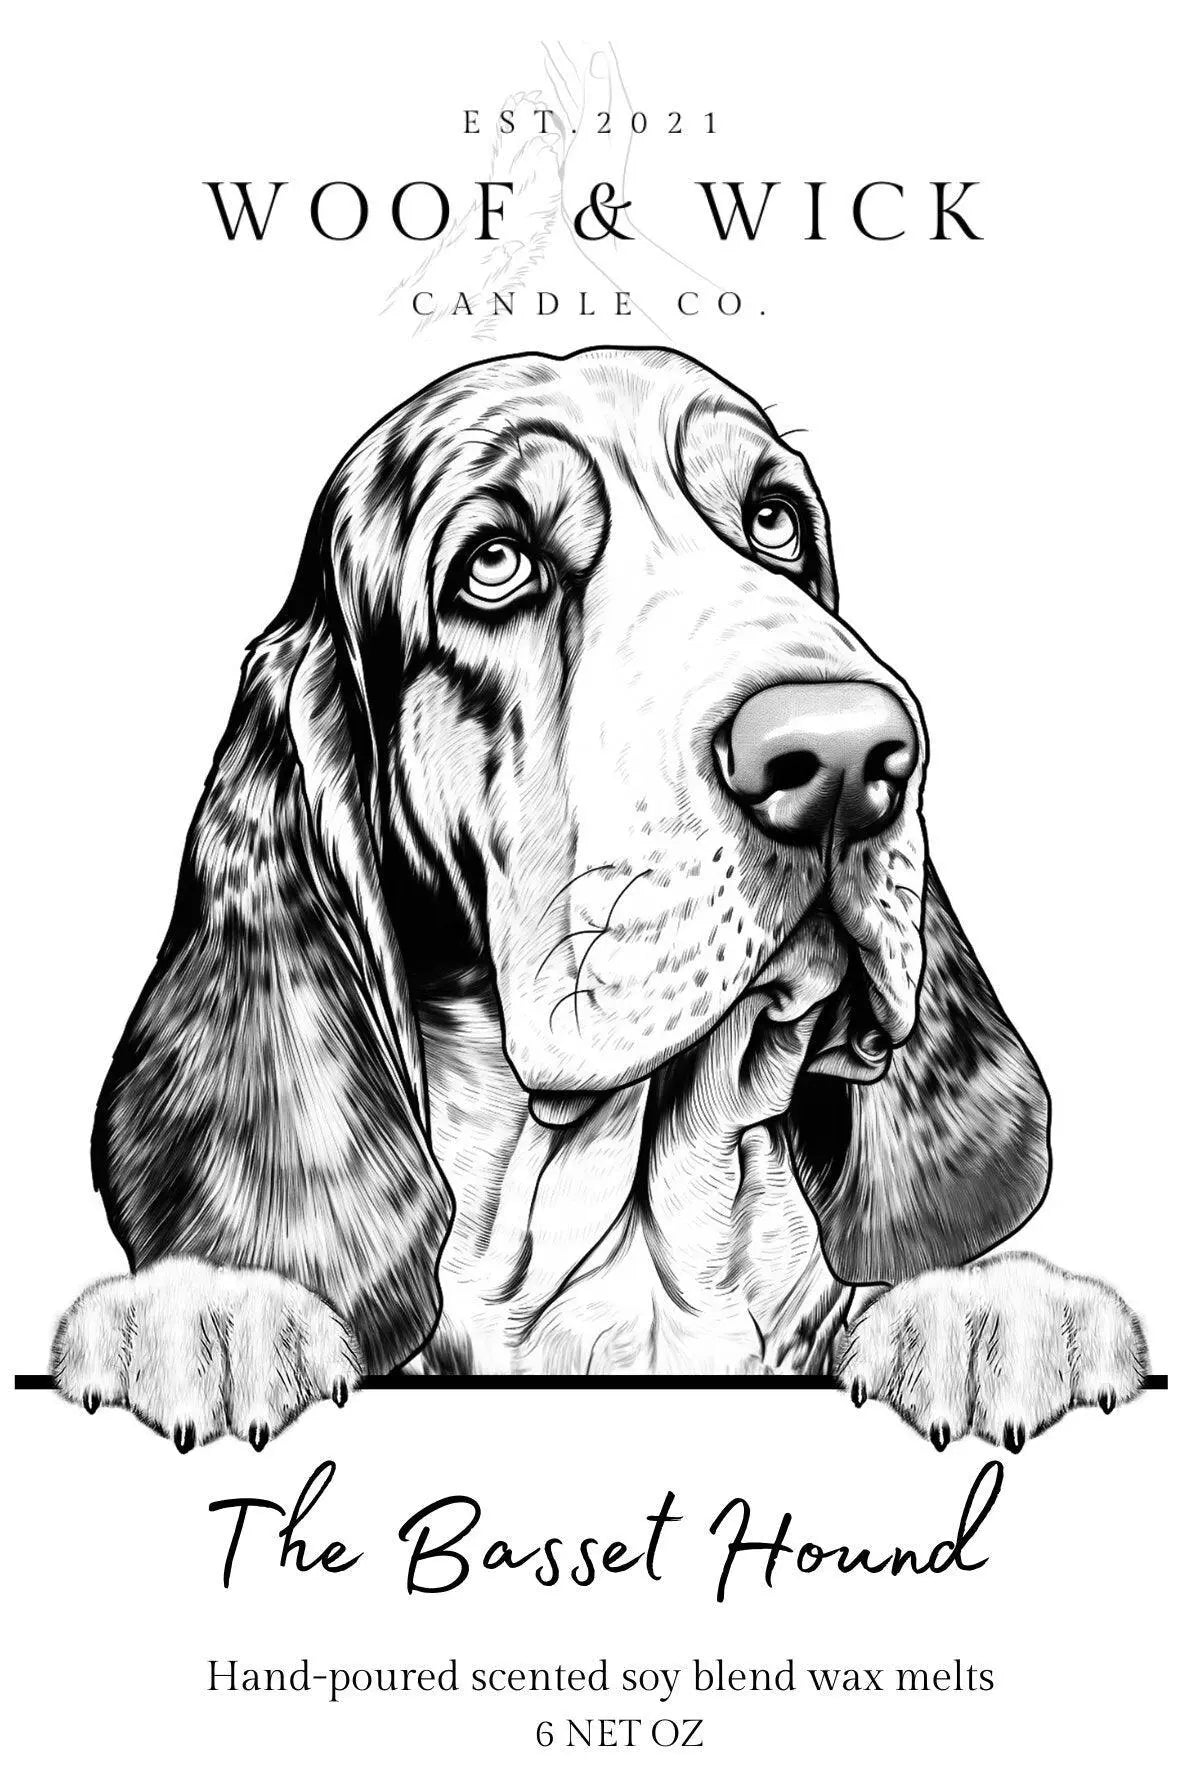 The Basset Hound - STRONG SCENTED Personalized Dog Breed Soy Wax Melts | Gift Ideas | Spring Scents | Wax Tarts | spring | - Woof & Wick Candle Co.